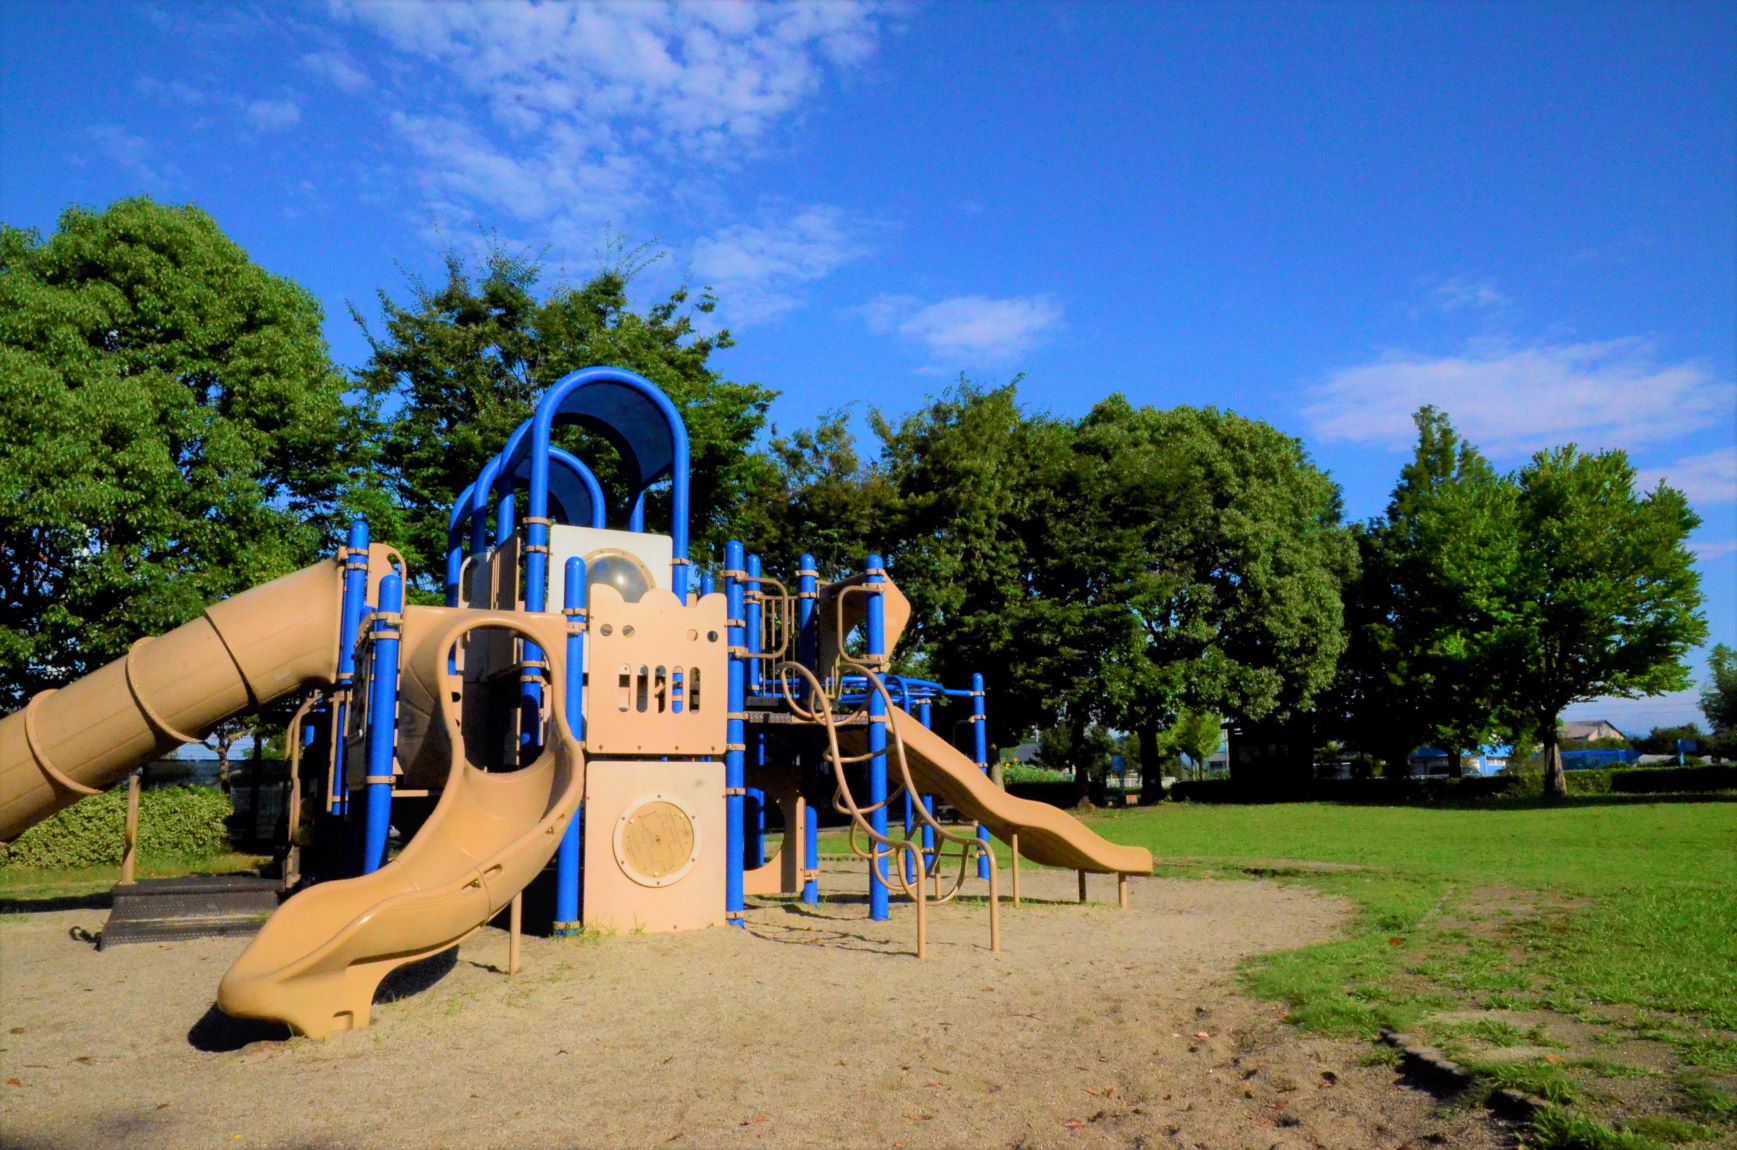 Early morning park in July 2021